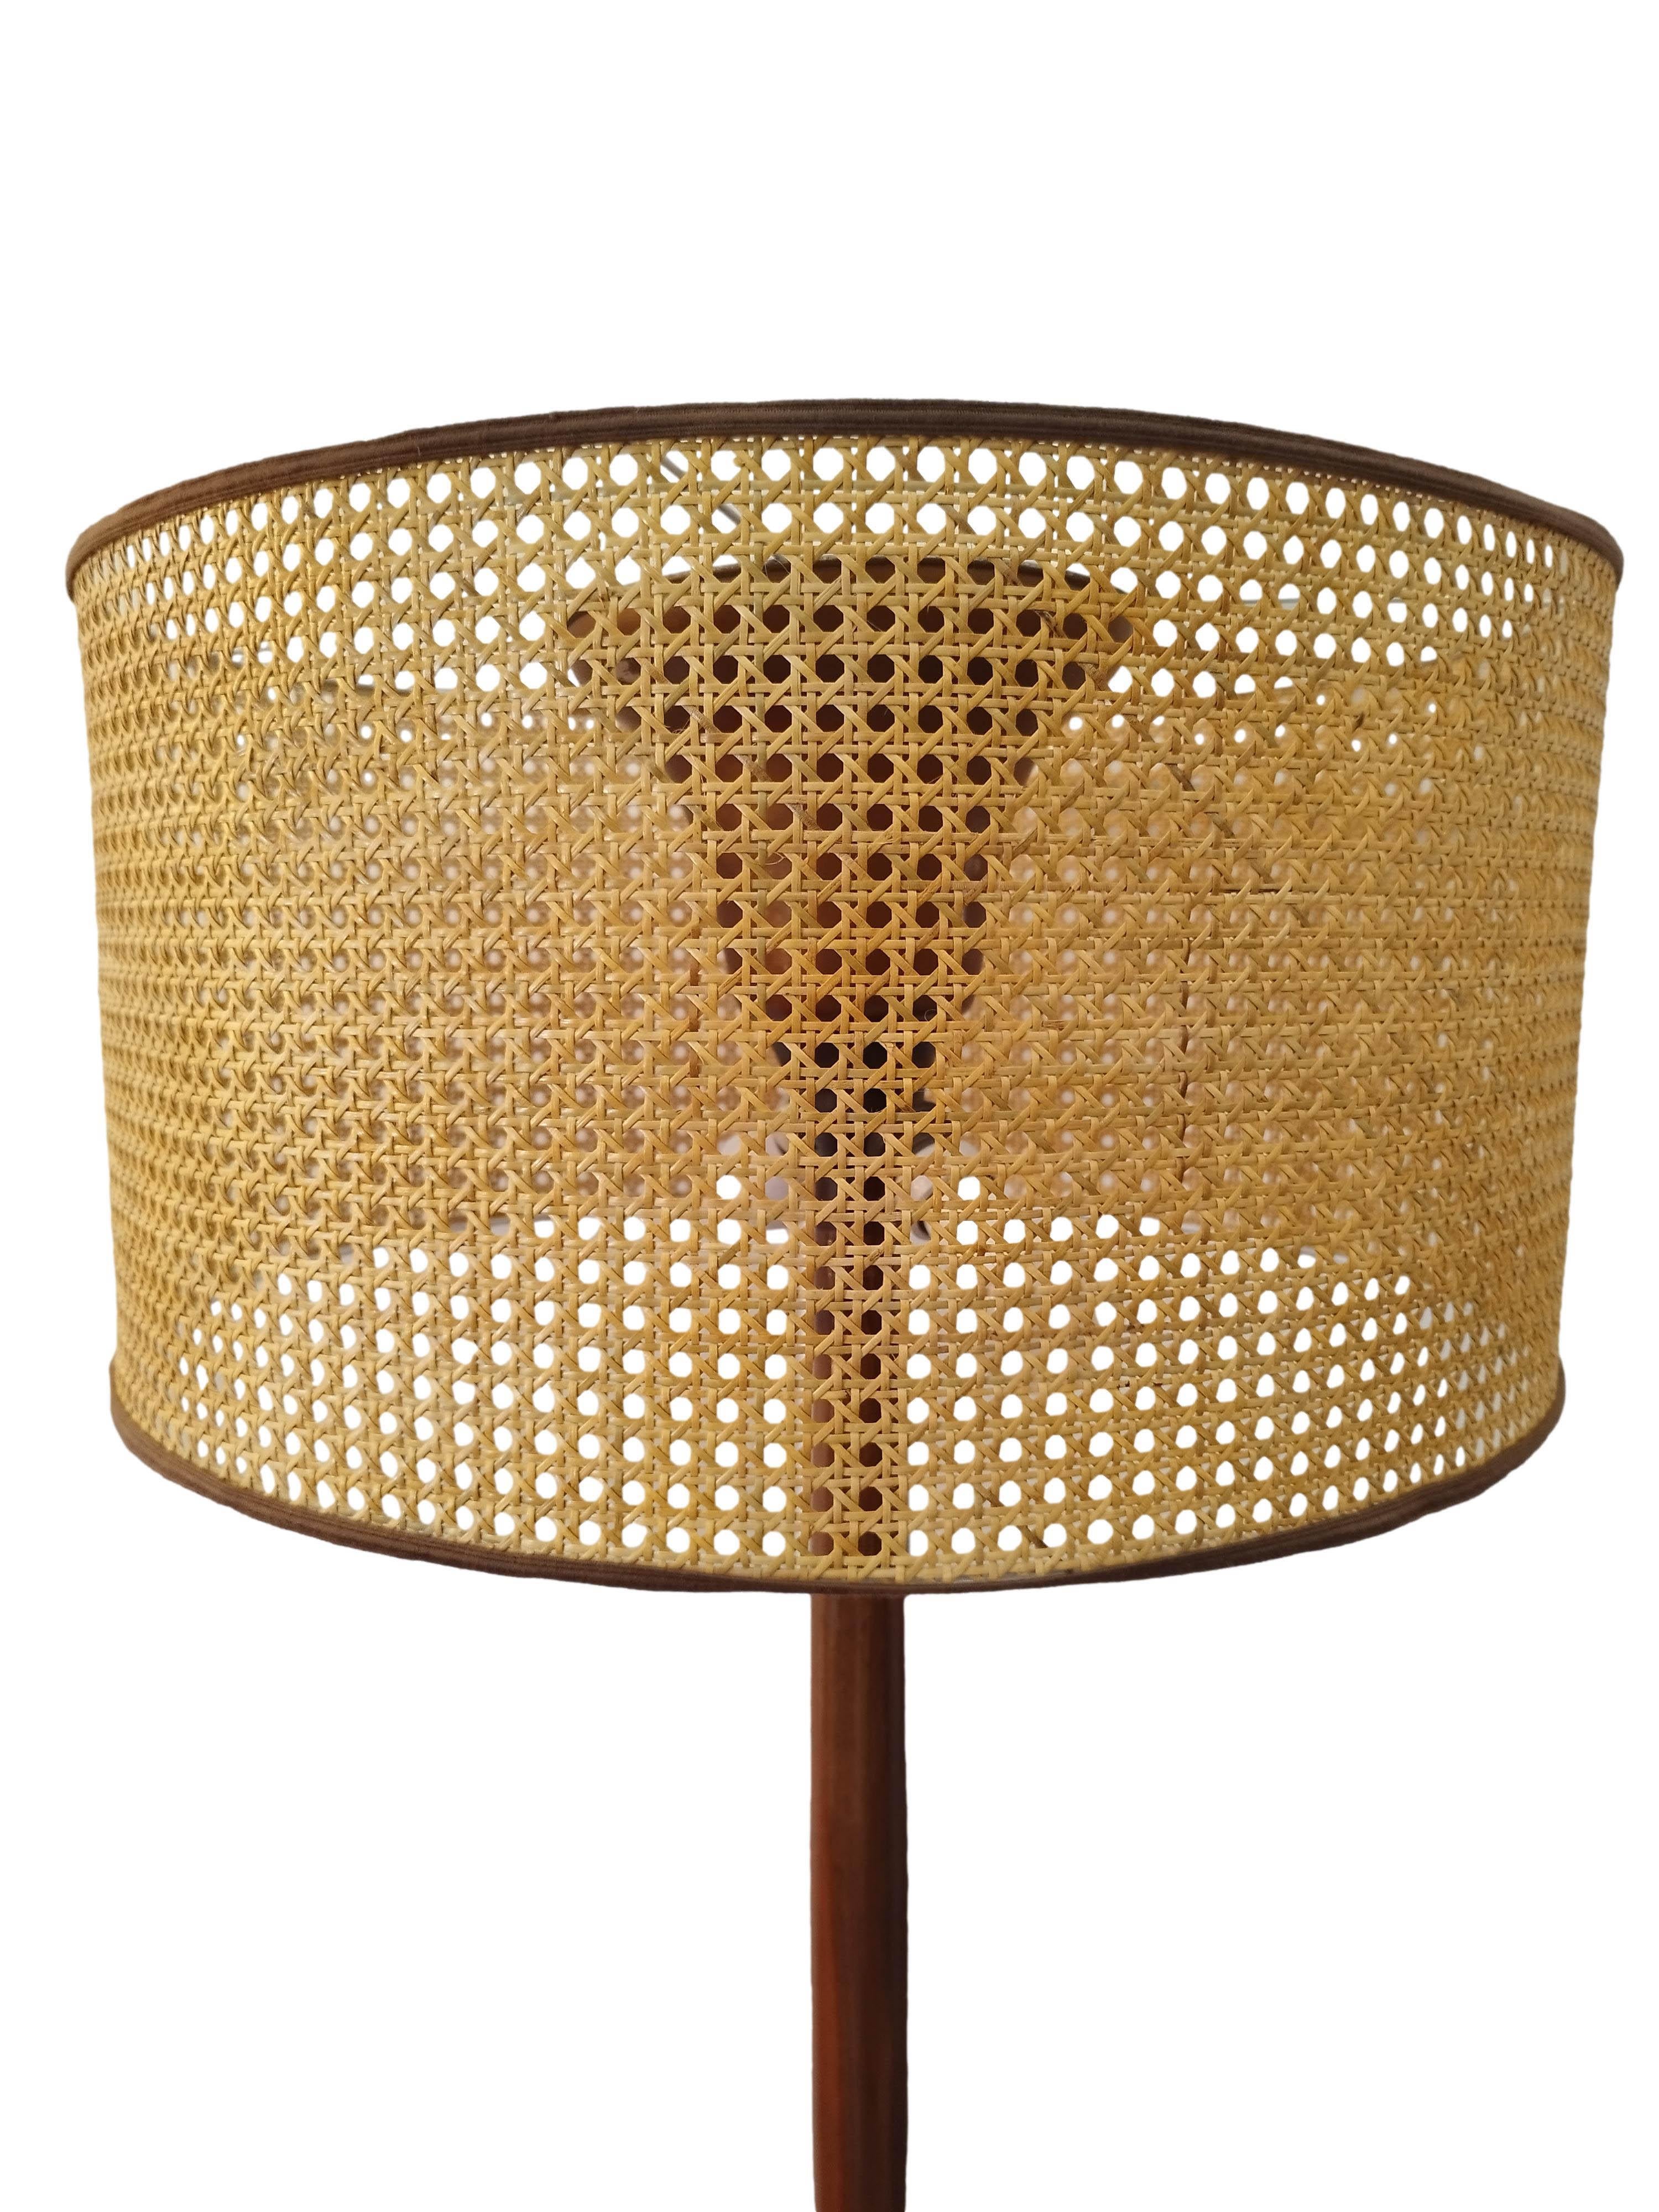 Beautiful floor lamp made of turned cherry wood and Vienna straw shade, Italian production 1950s.